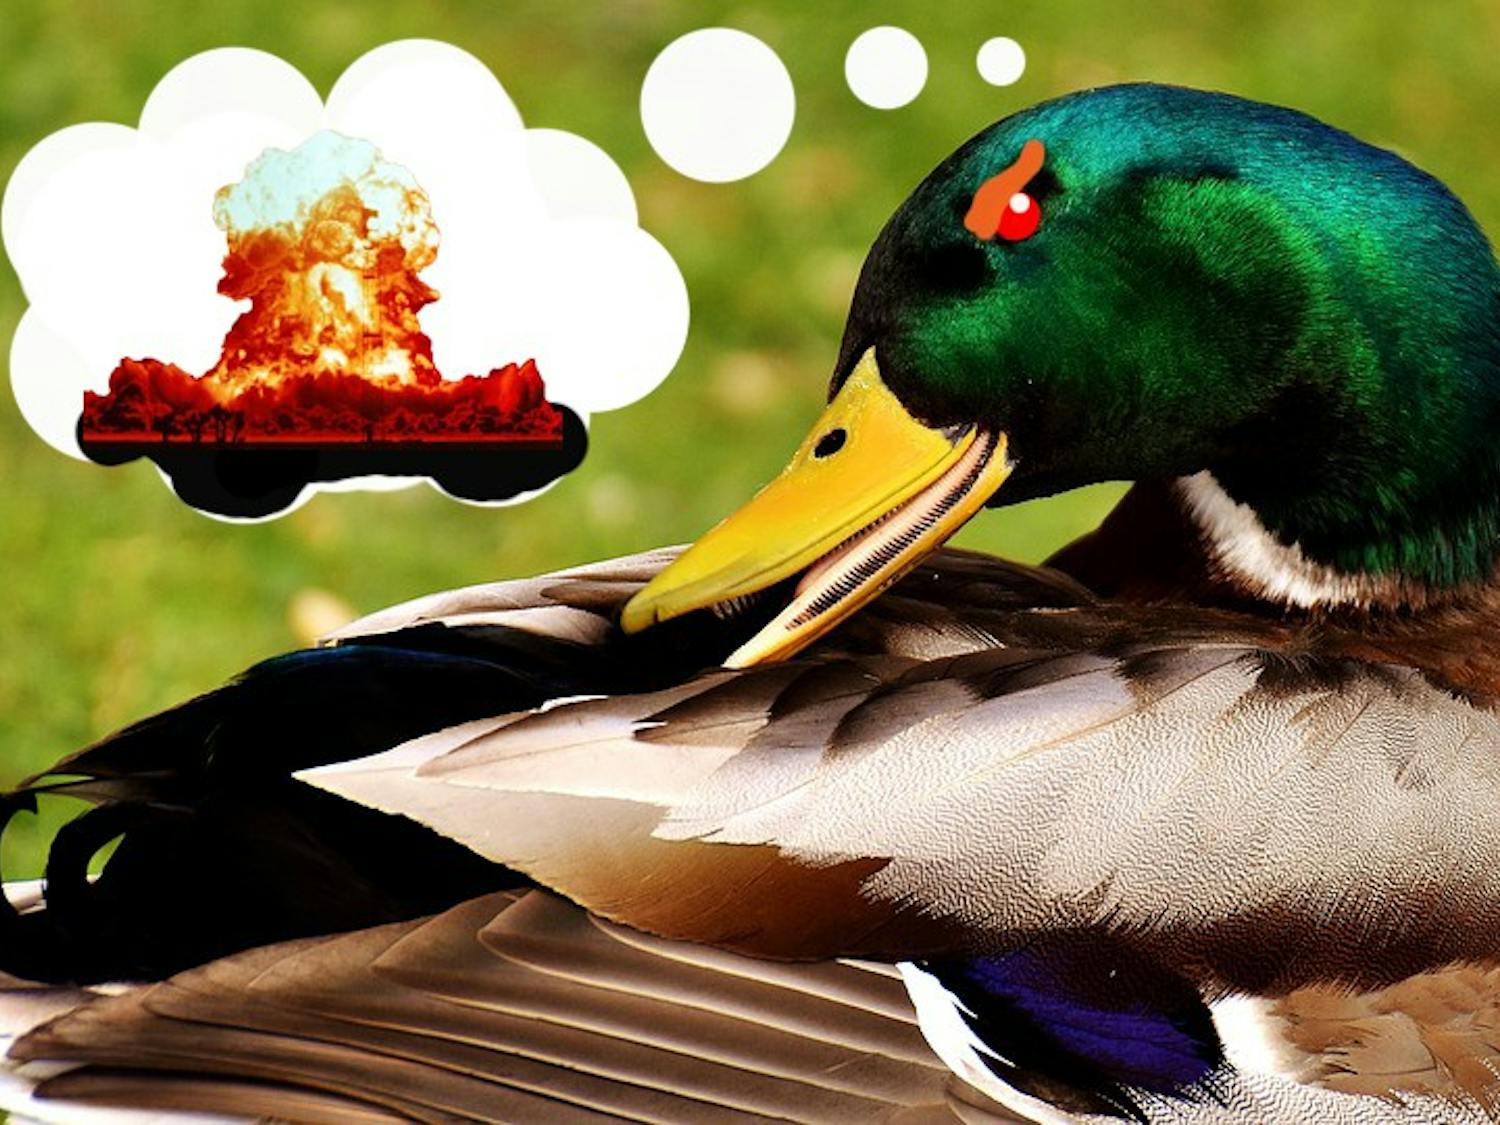 A local newly-superior mallard aspires to be the scourge of humanity.